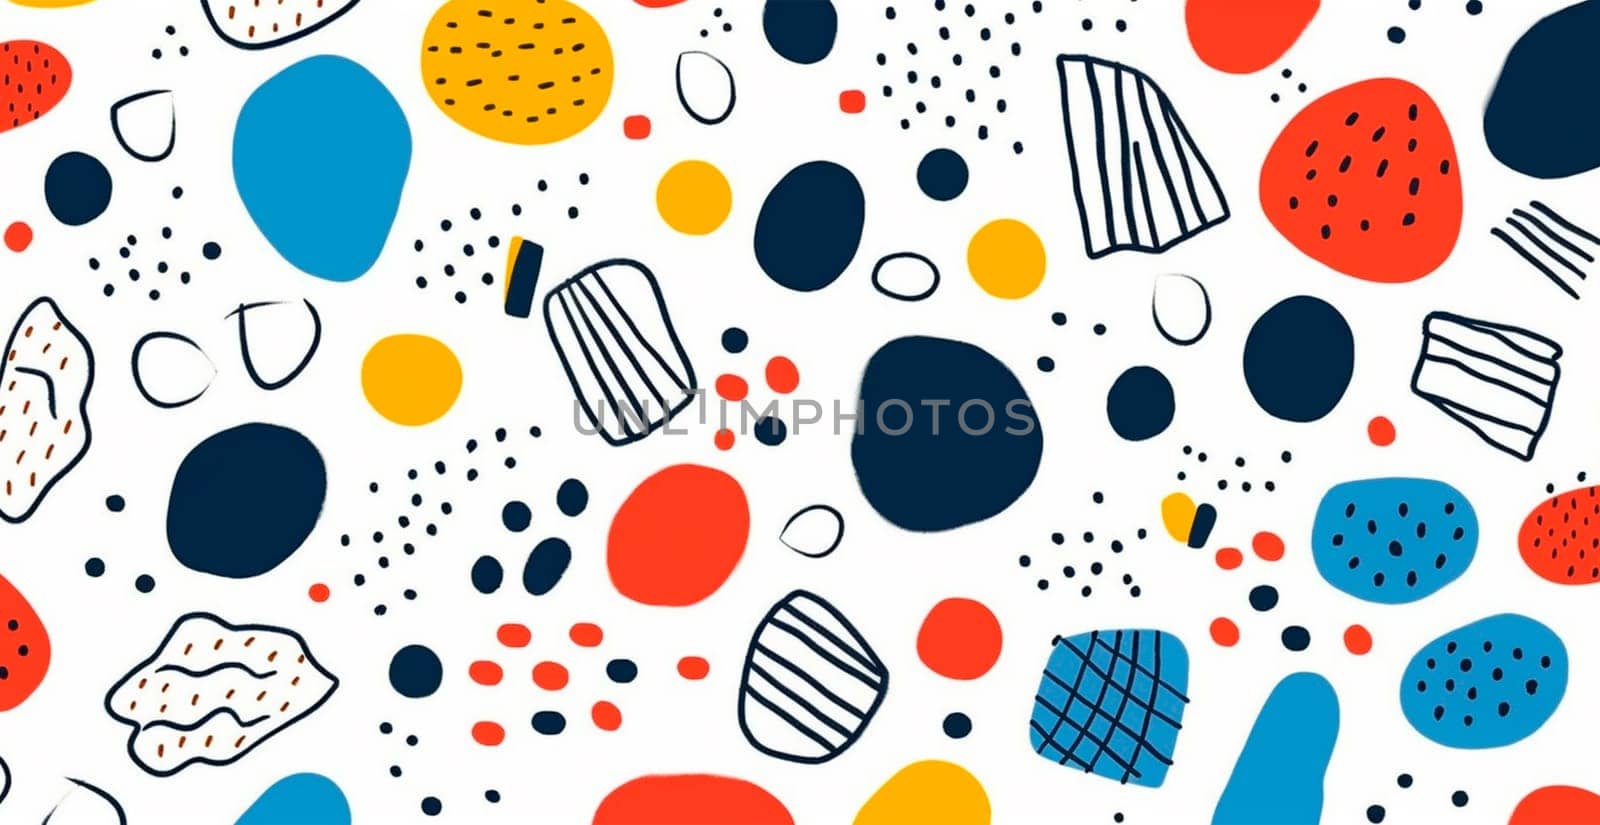 Abstract geometric shapes multicolored bright background - image